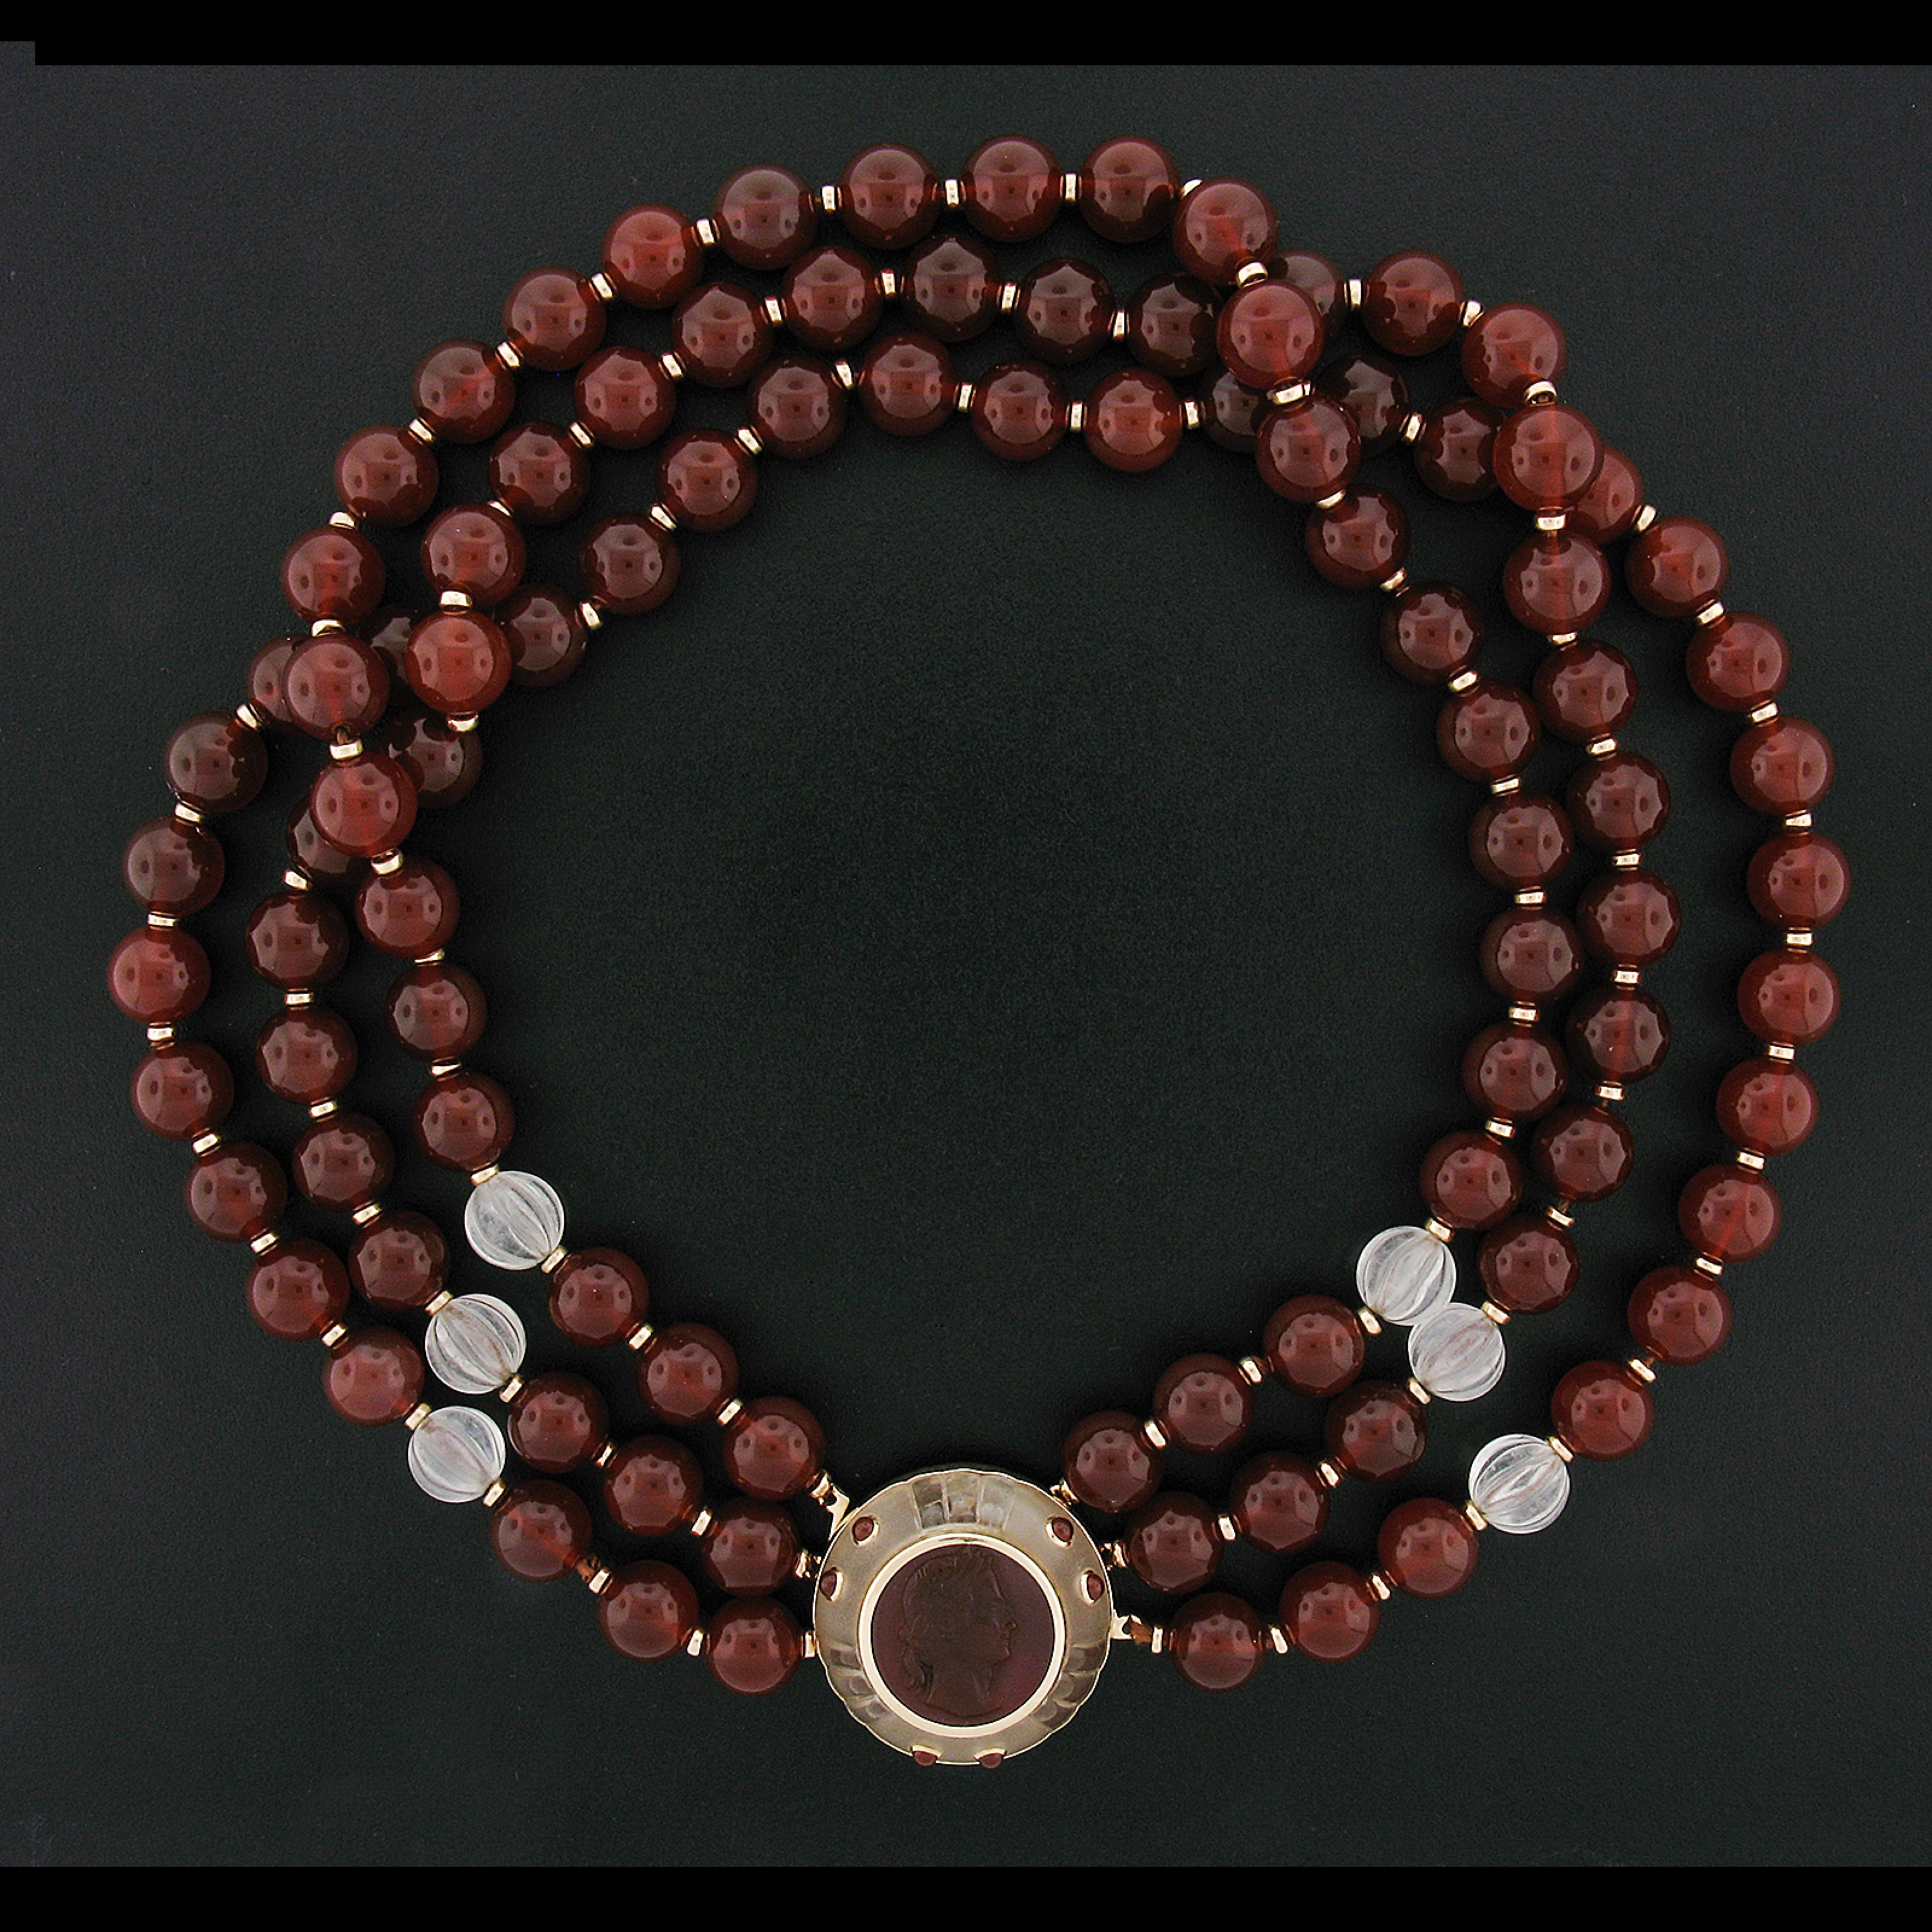 Trianon 3 Strand Carnelian & Rock Crystal Bead Necklace & Cameo 14k Gold Pendant In Good Condition For Sale In Montclair, NJ